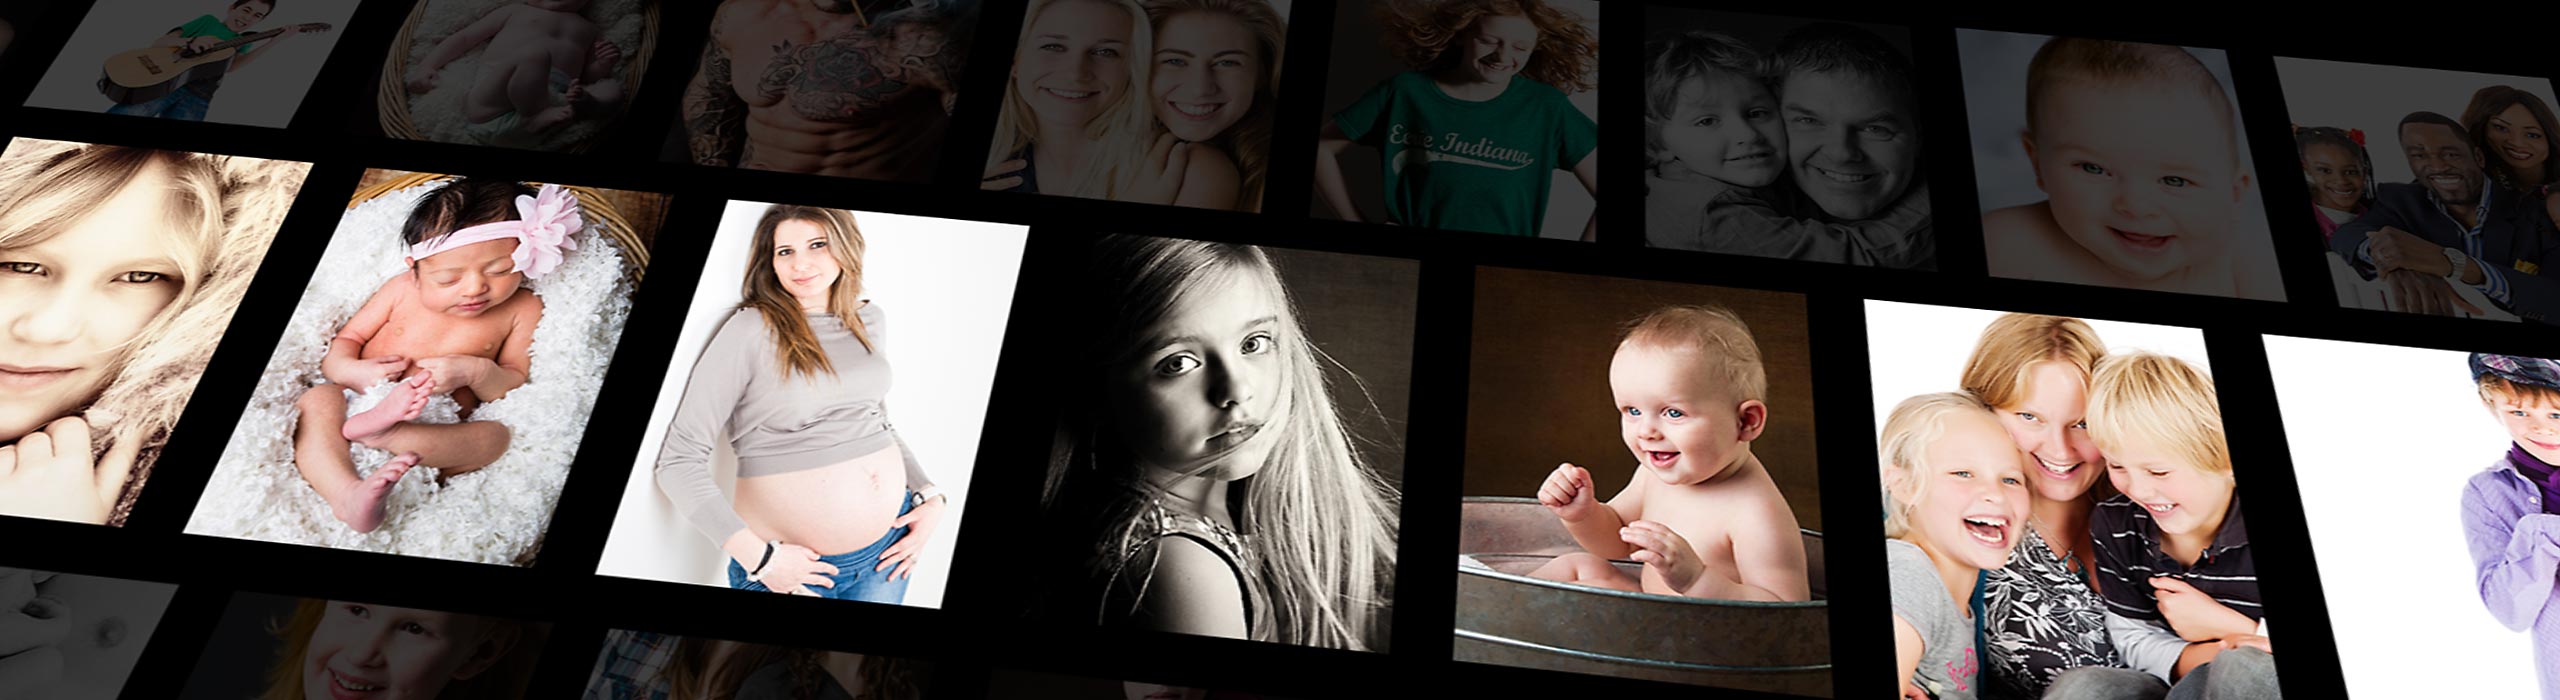 Film strips of a variety of studio family photography images.